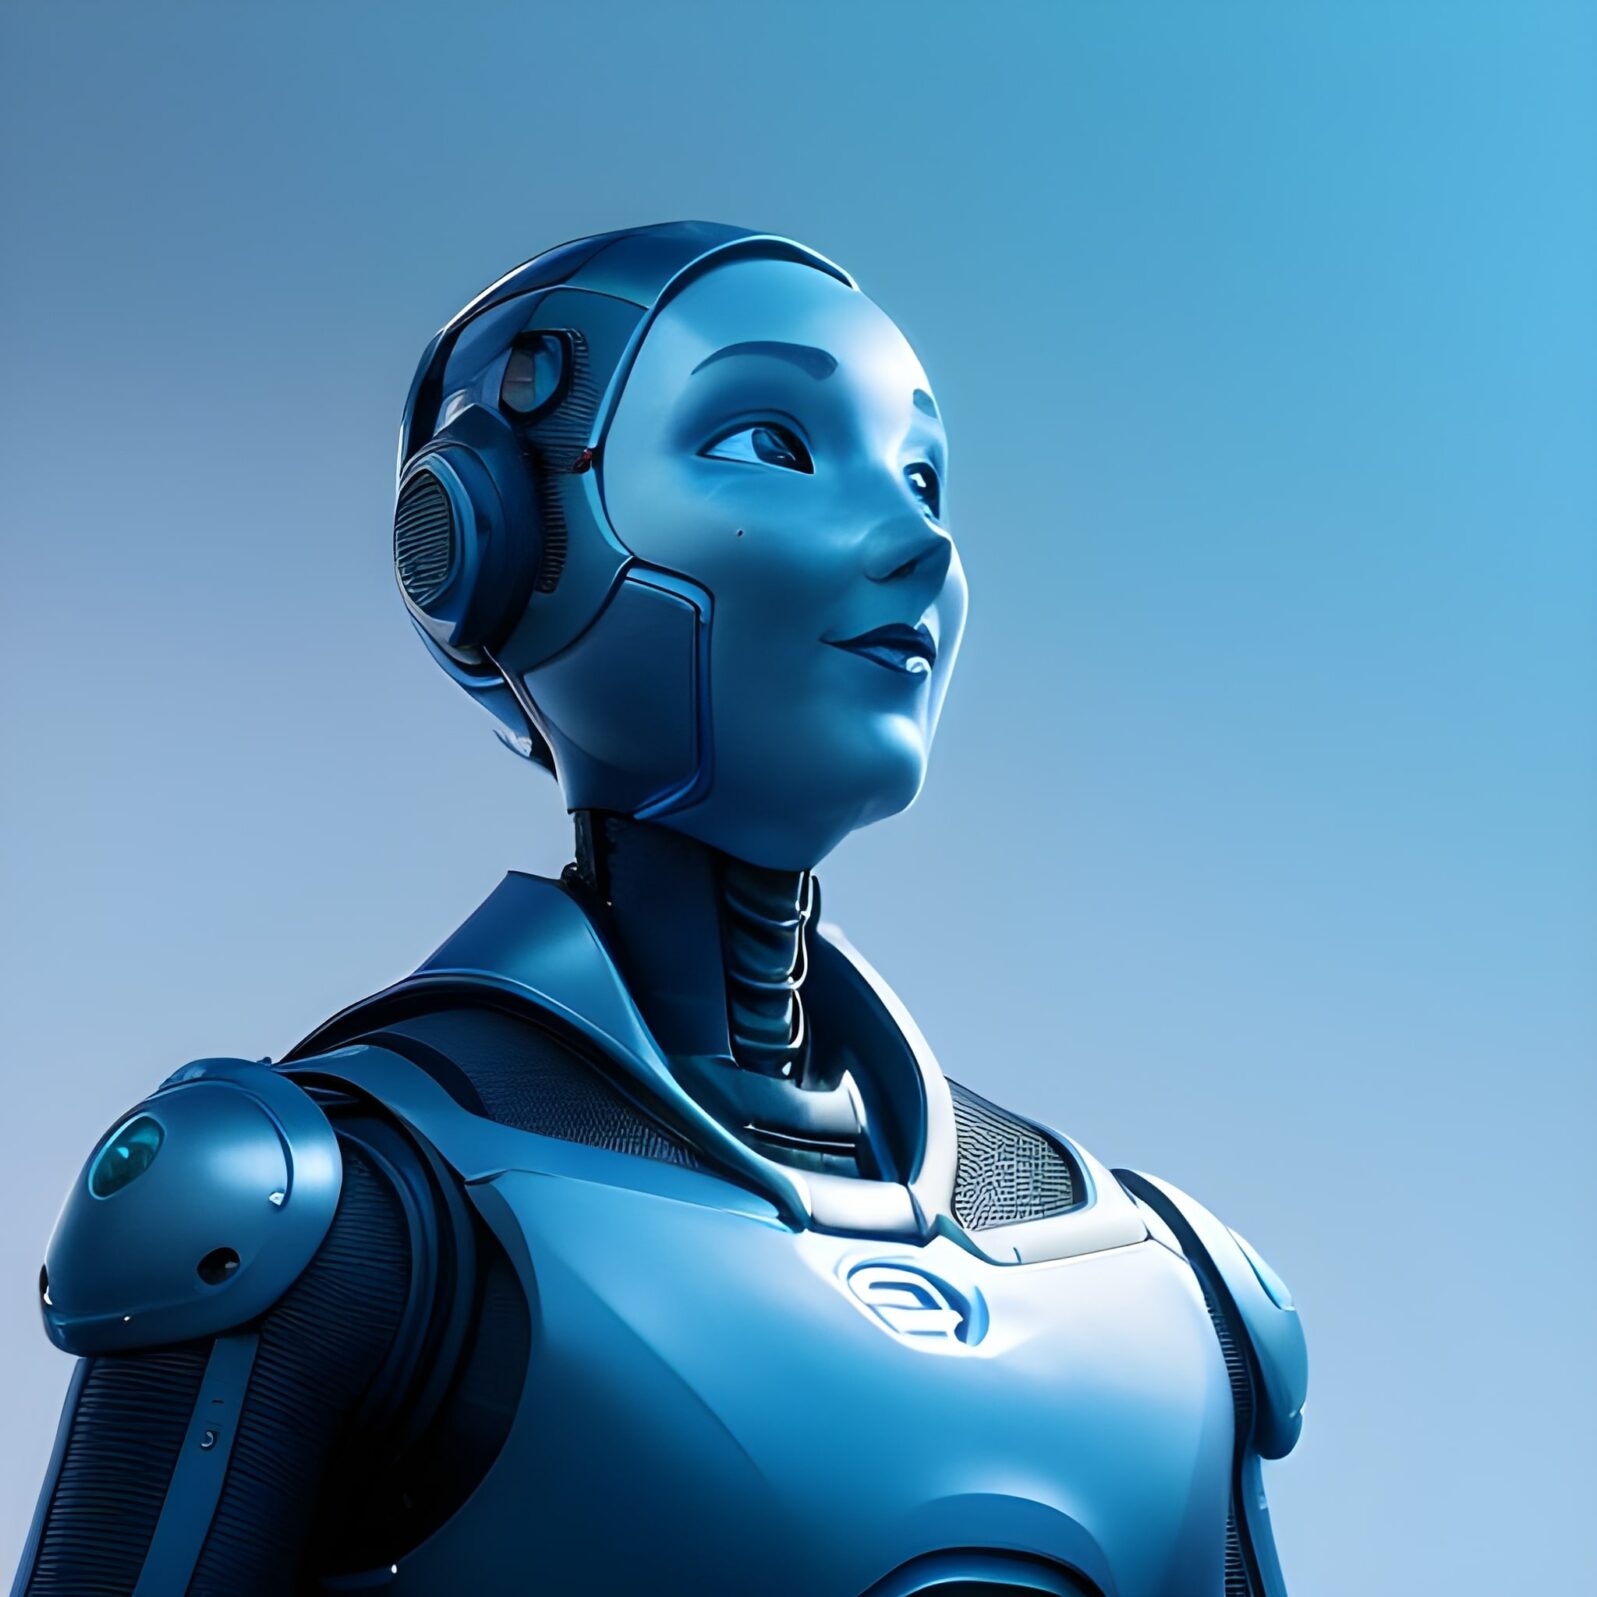 The Captivating Robotic Woman of Innovation